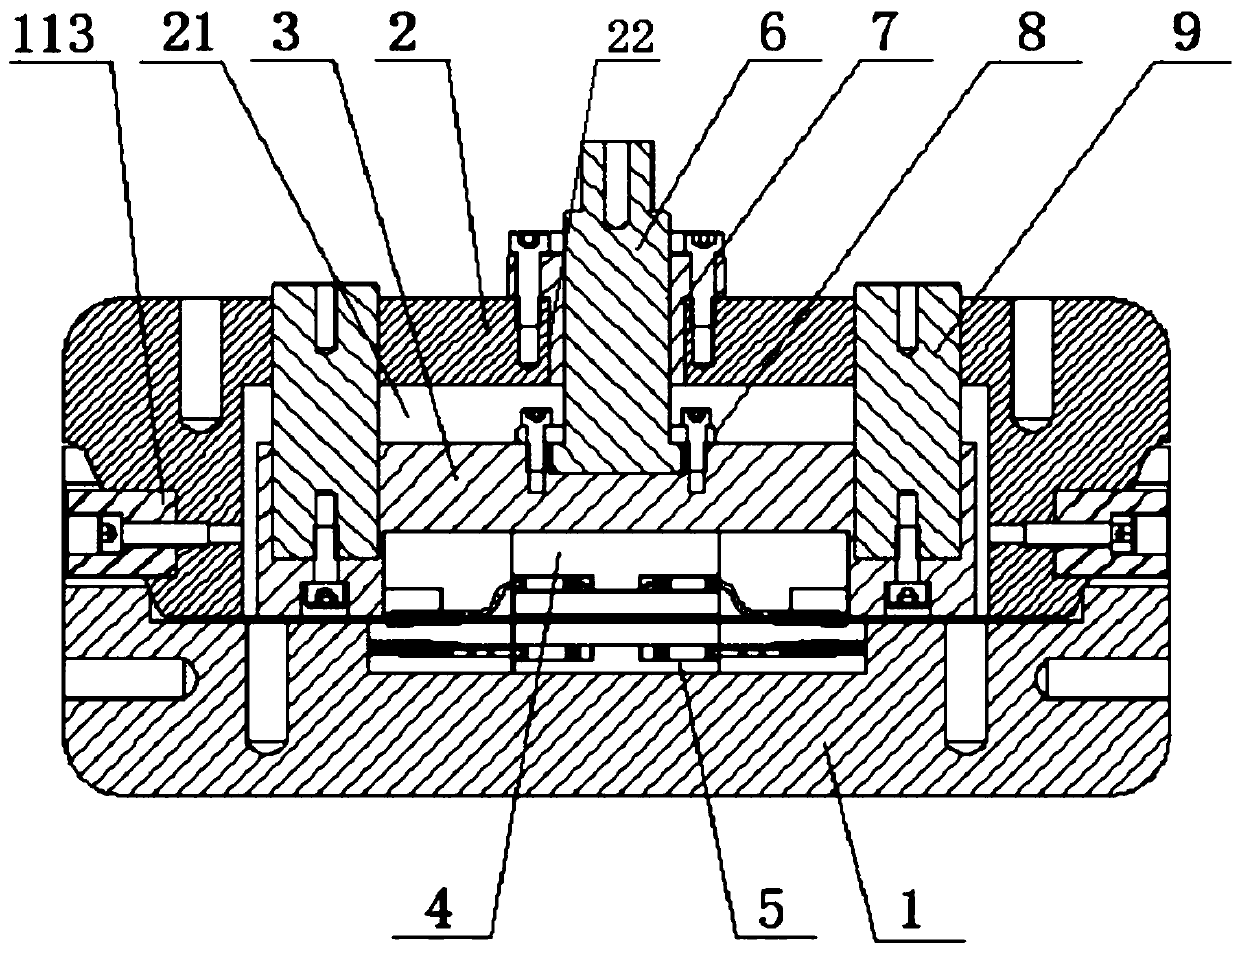 An experimental device and testing method for testing the electrical performance of a multi-contact electrical connection structure